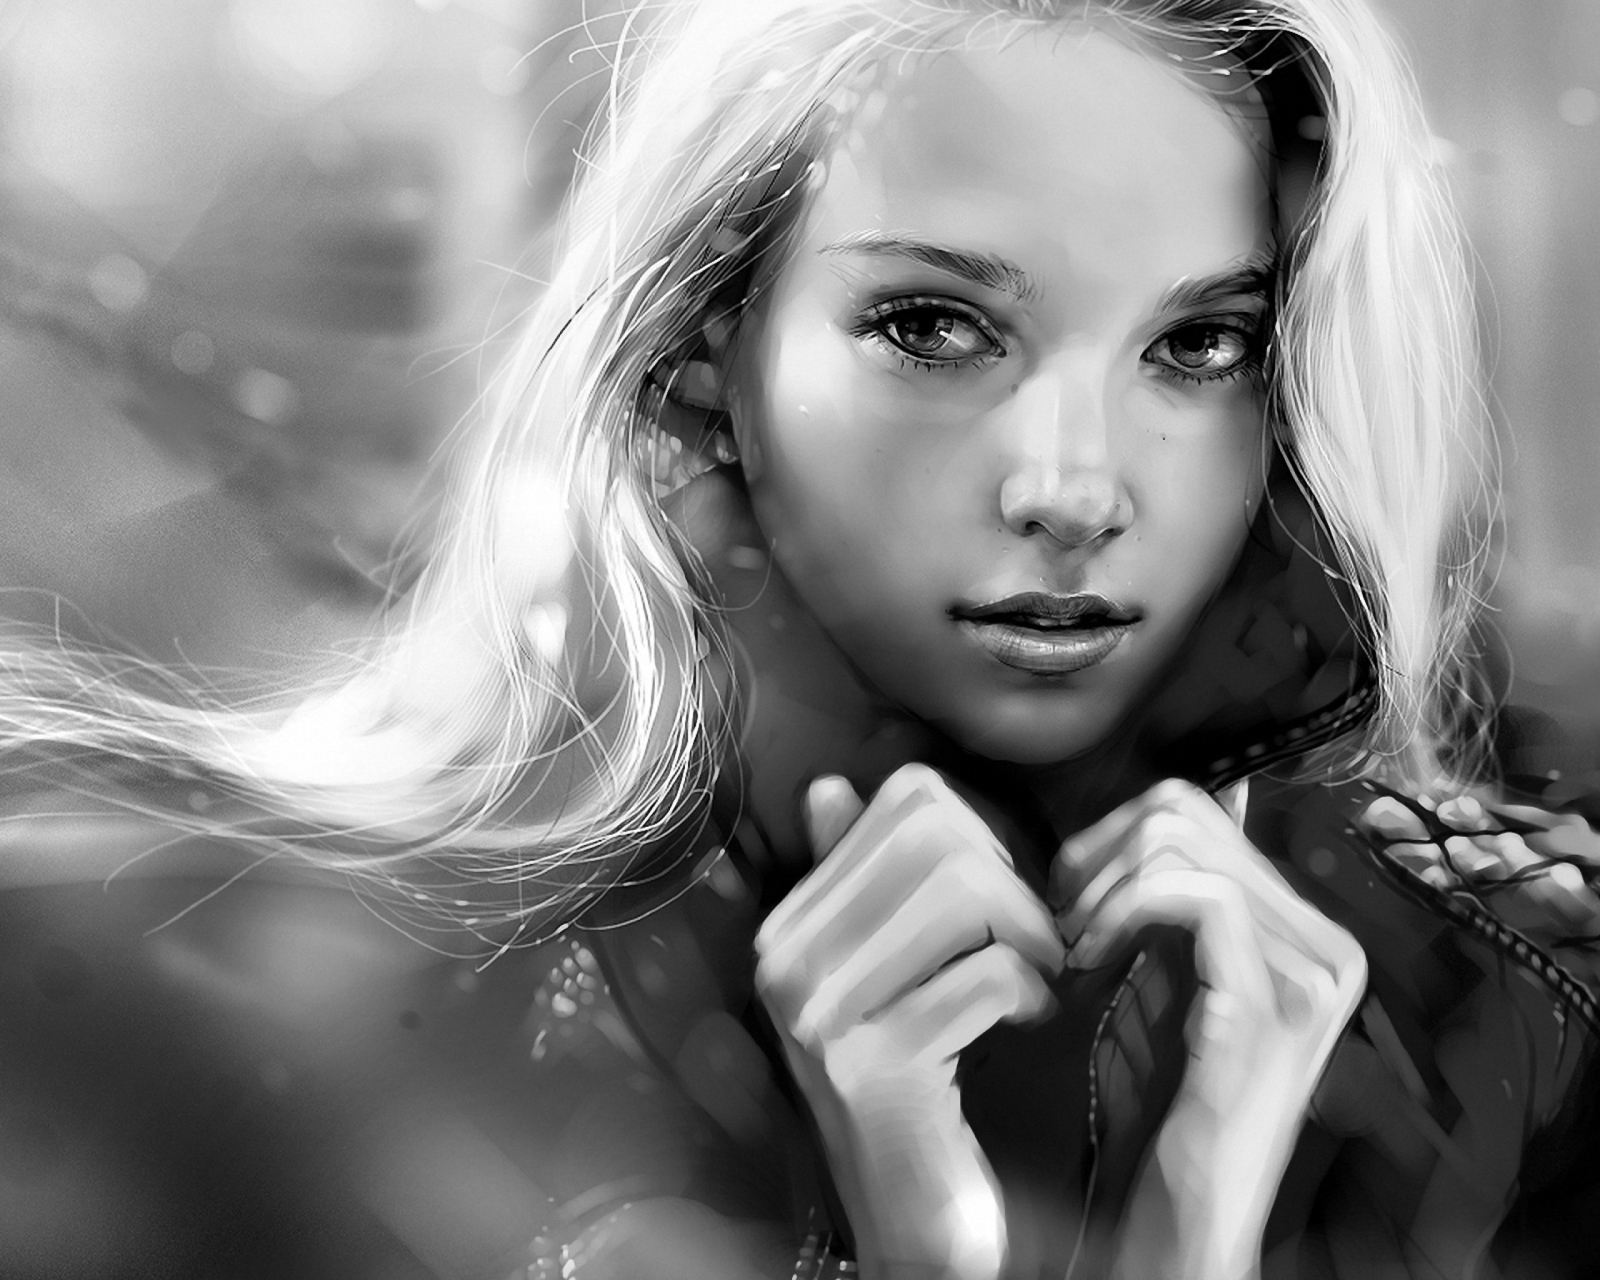 Black And White Blonde Painting wallpaper 1600x1280